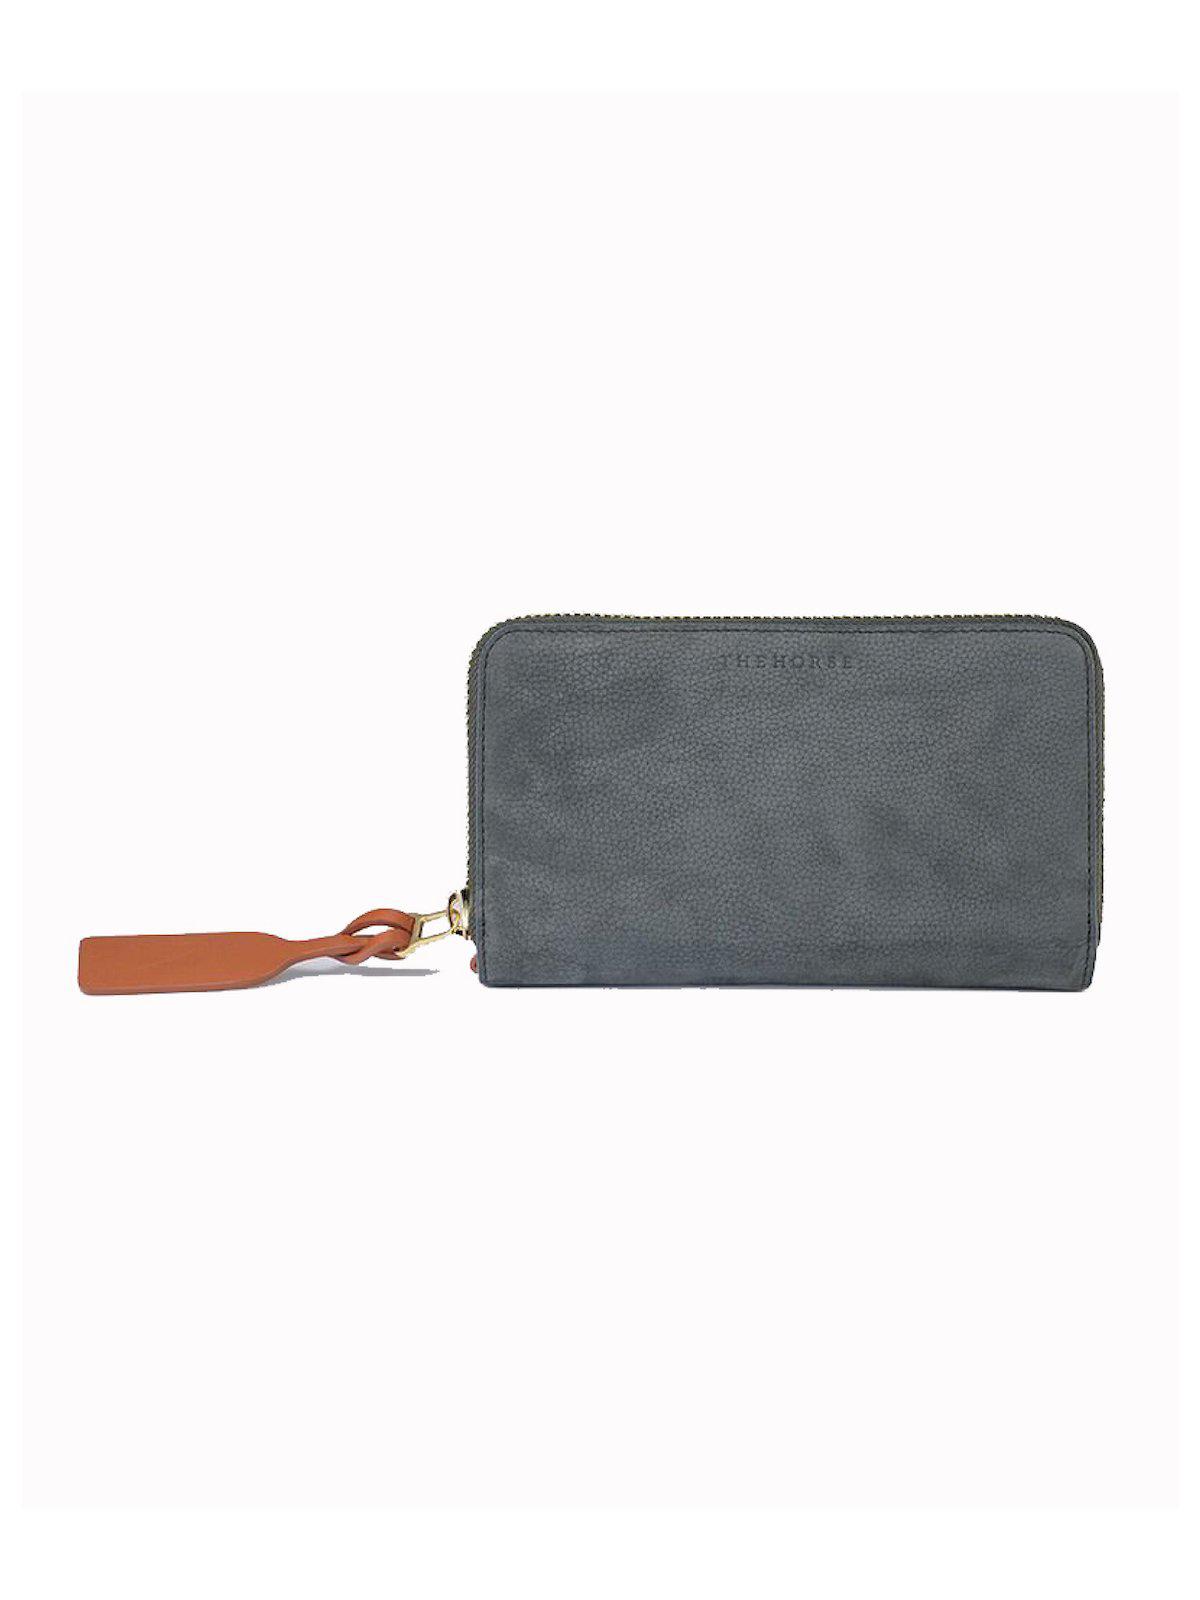 The Horse Block Wallet Moss Green - MORE by Morello Indonesia